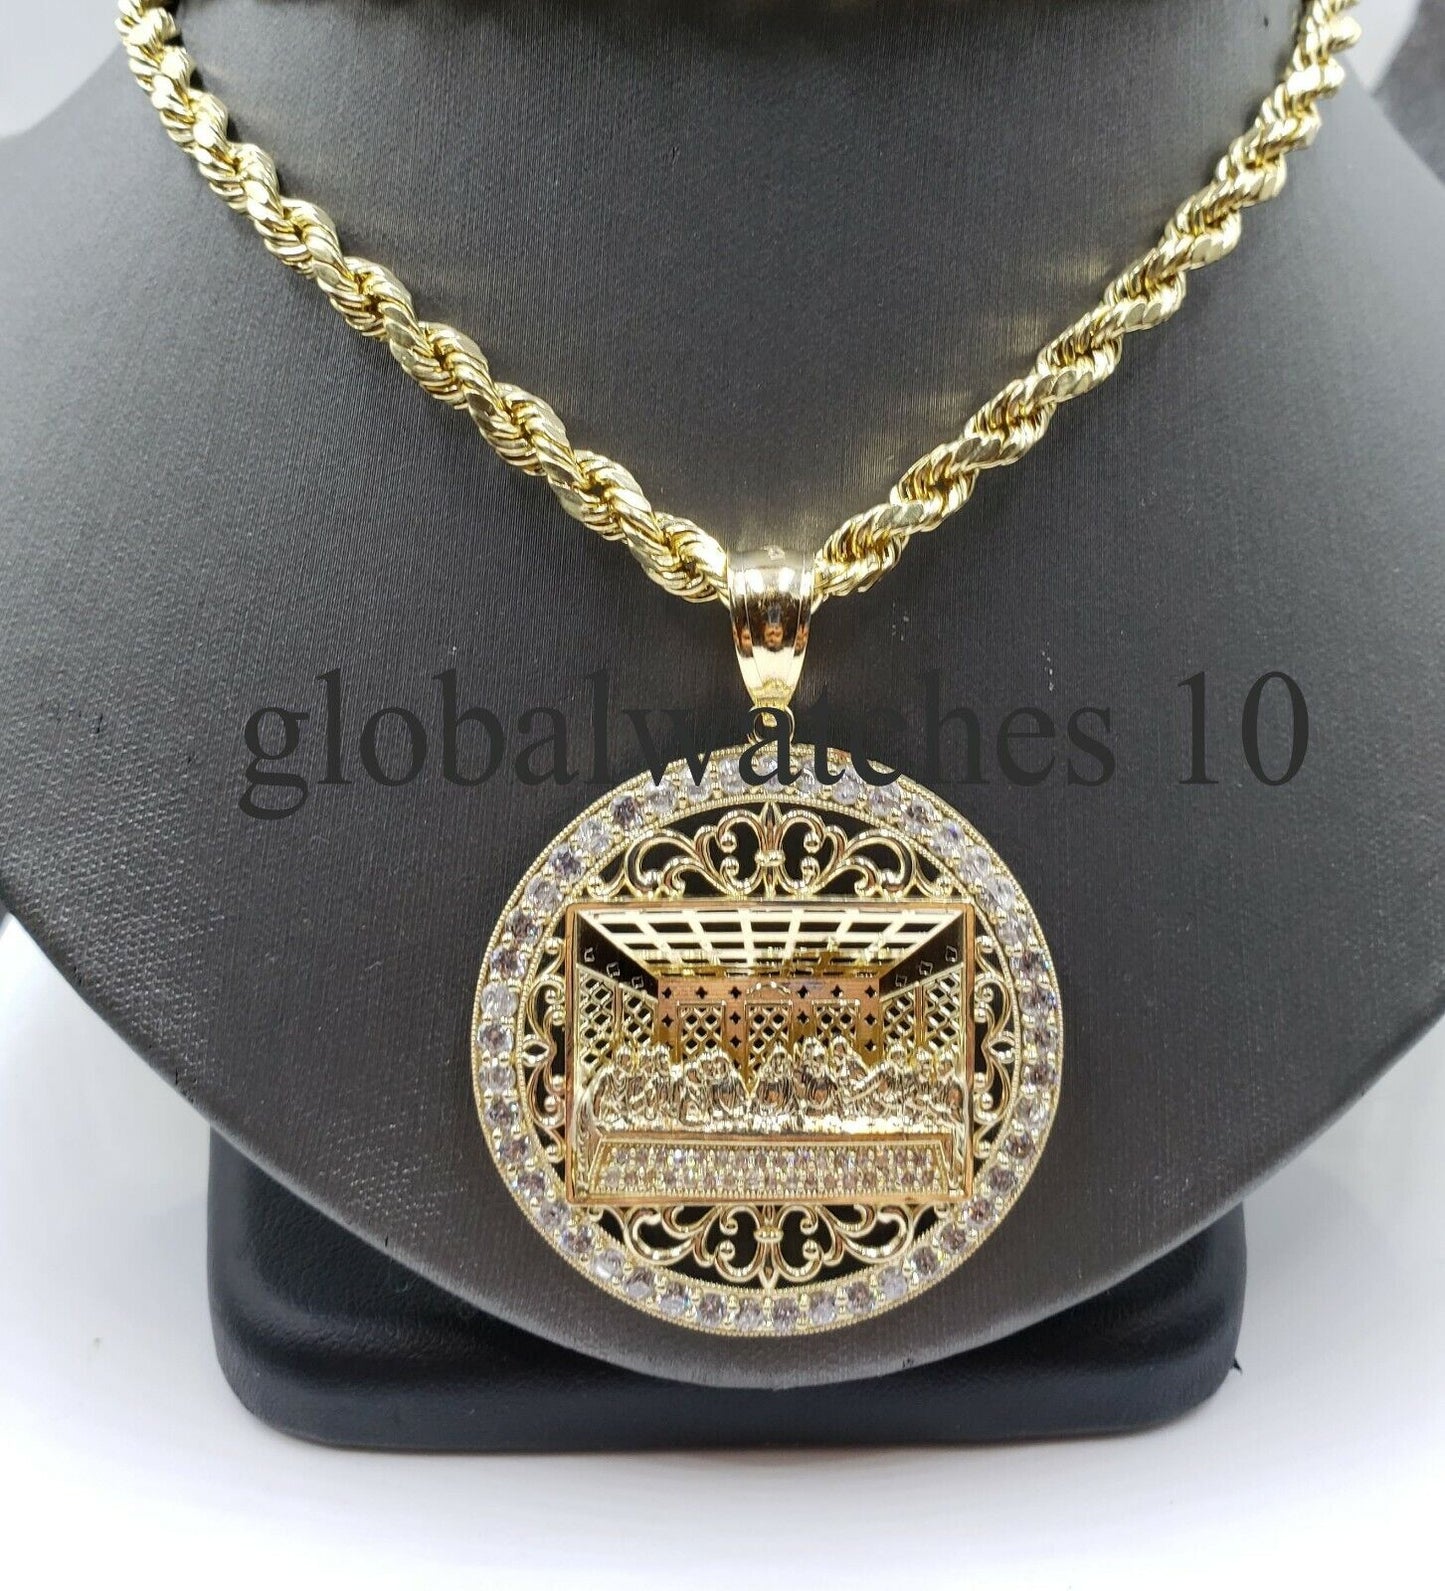 REAL 10k Gold Last supper Pendant 10kt Rope Chain Men Charm Necklace SET 22"-30"